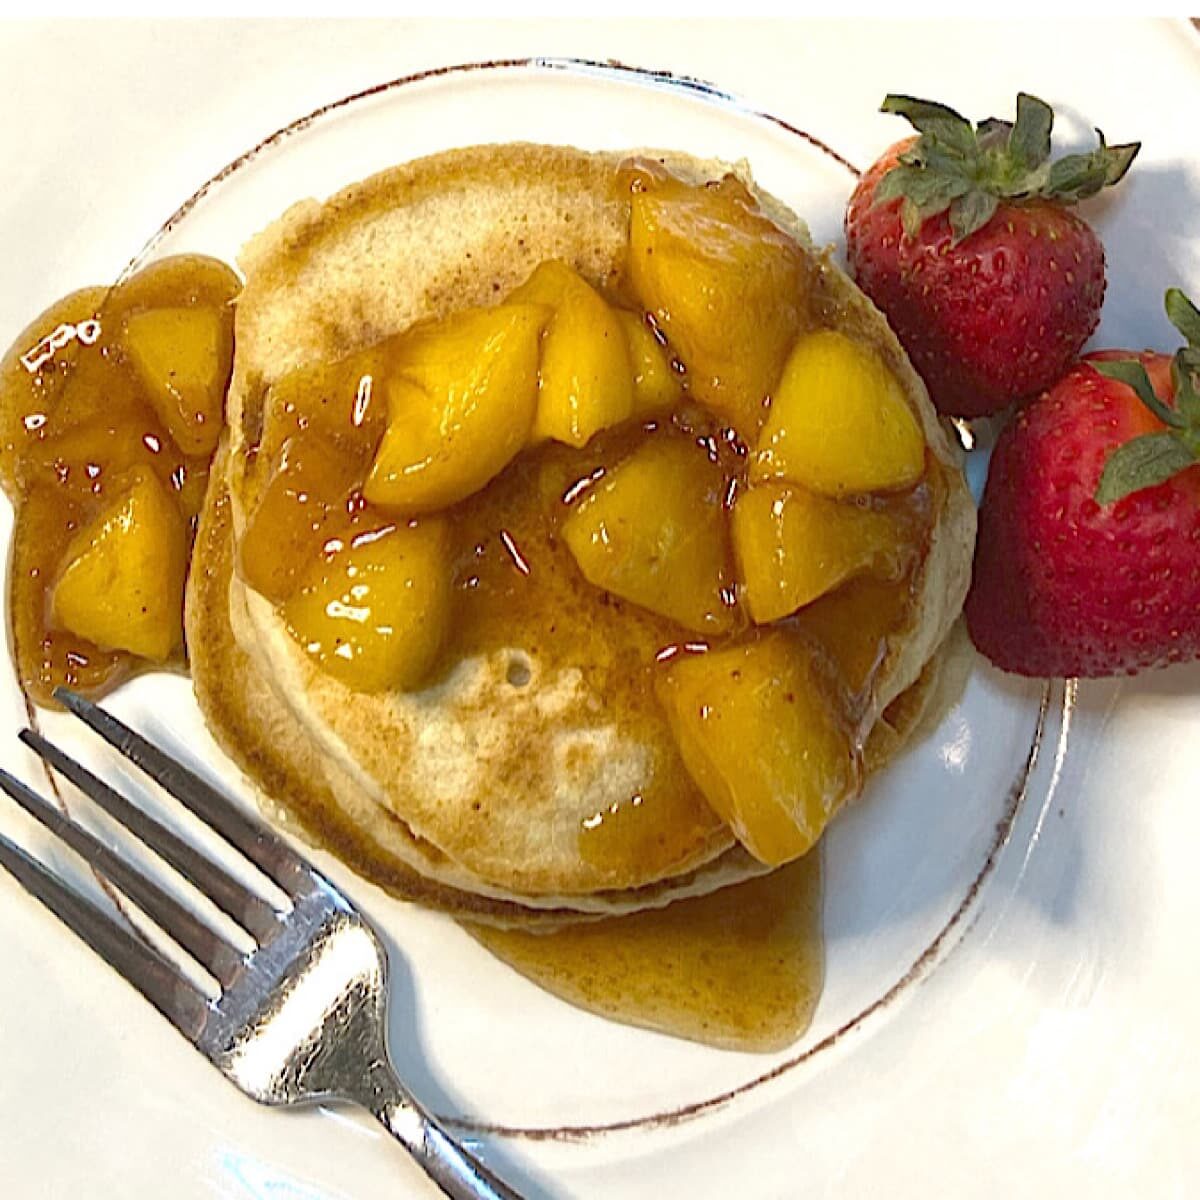 Plate of fluffy whole wheat pancakes served with cooked fruit and pur maple syrup.